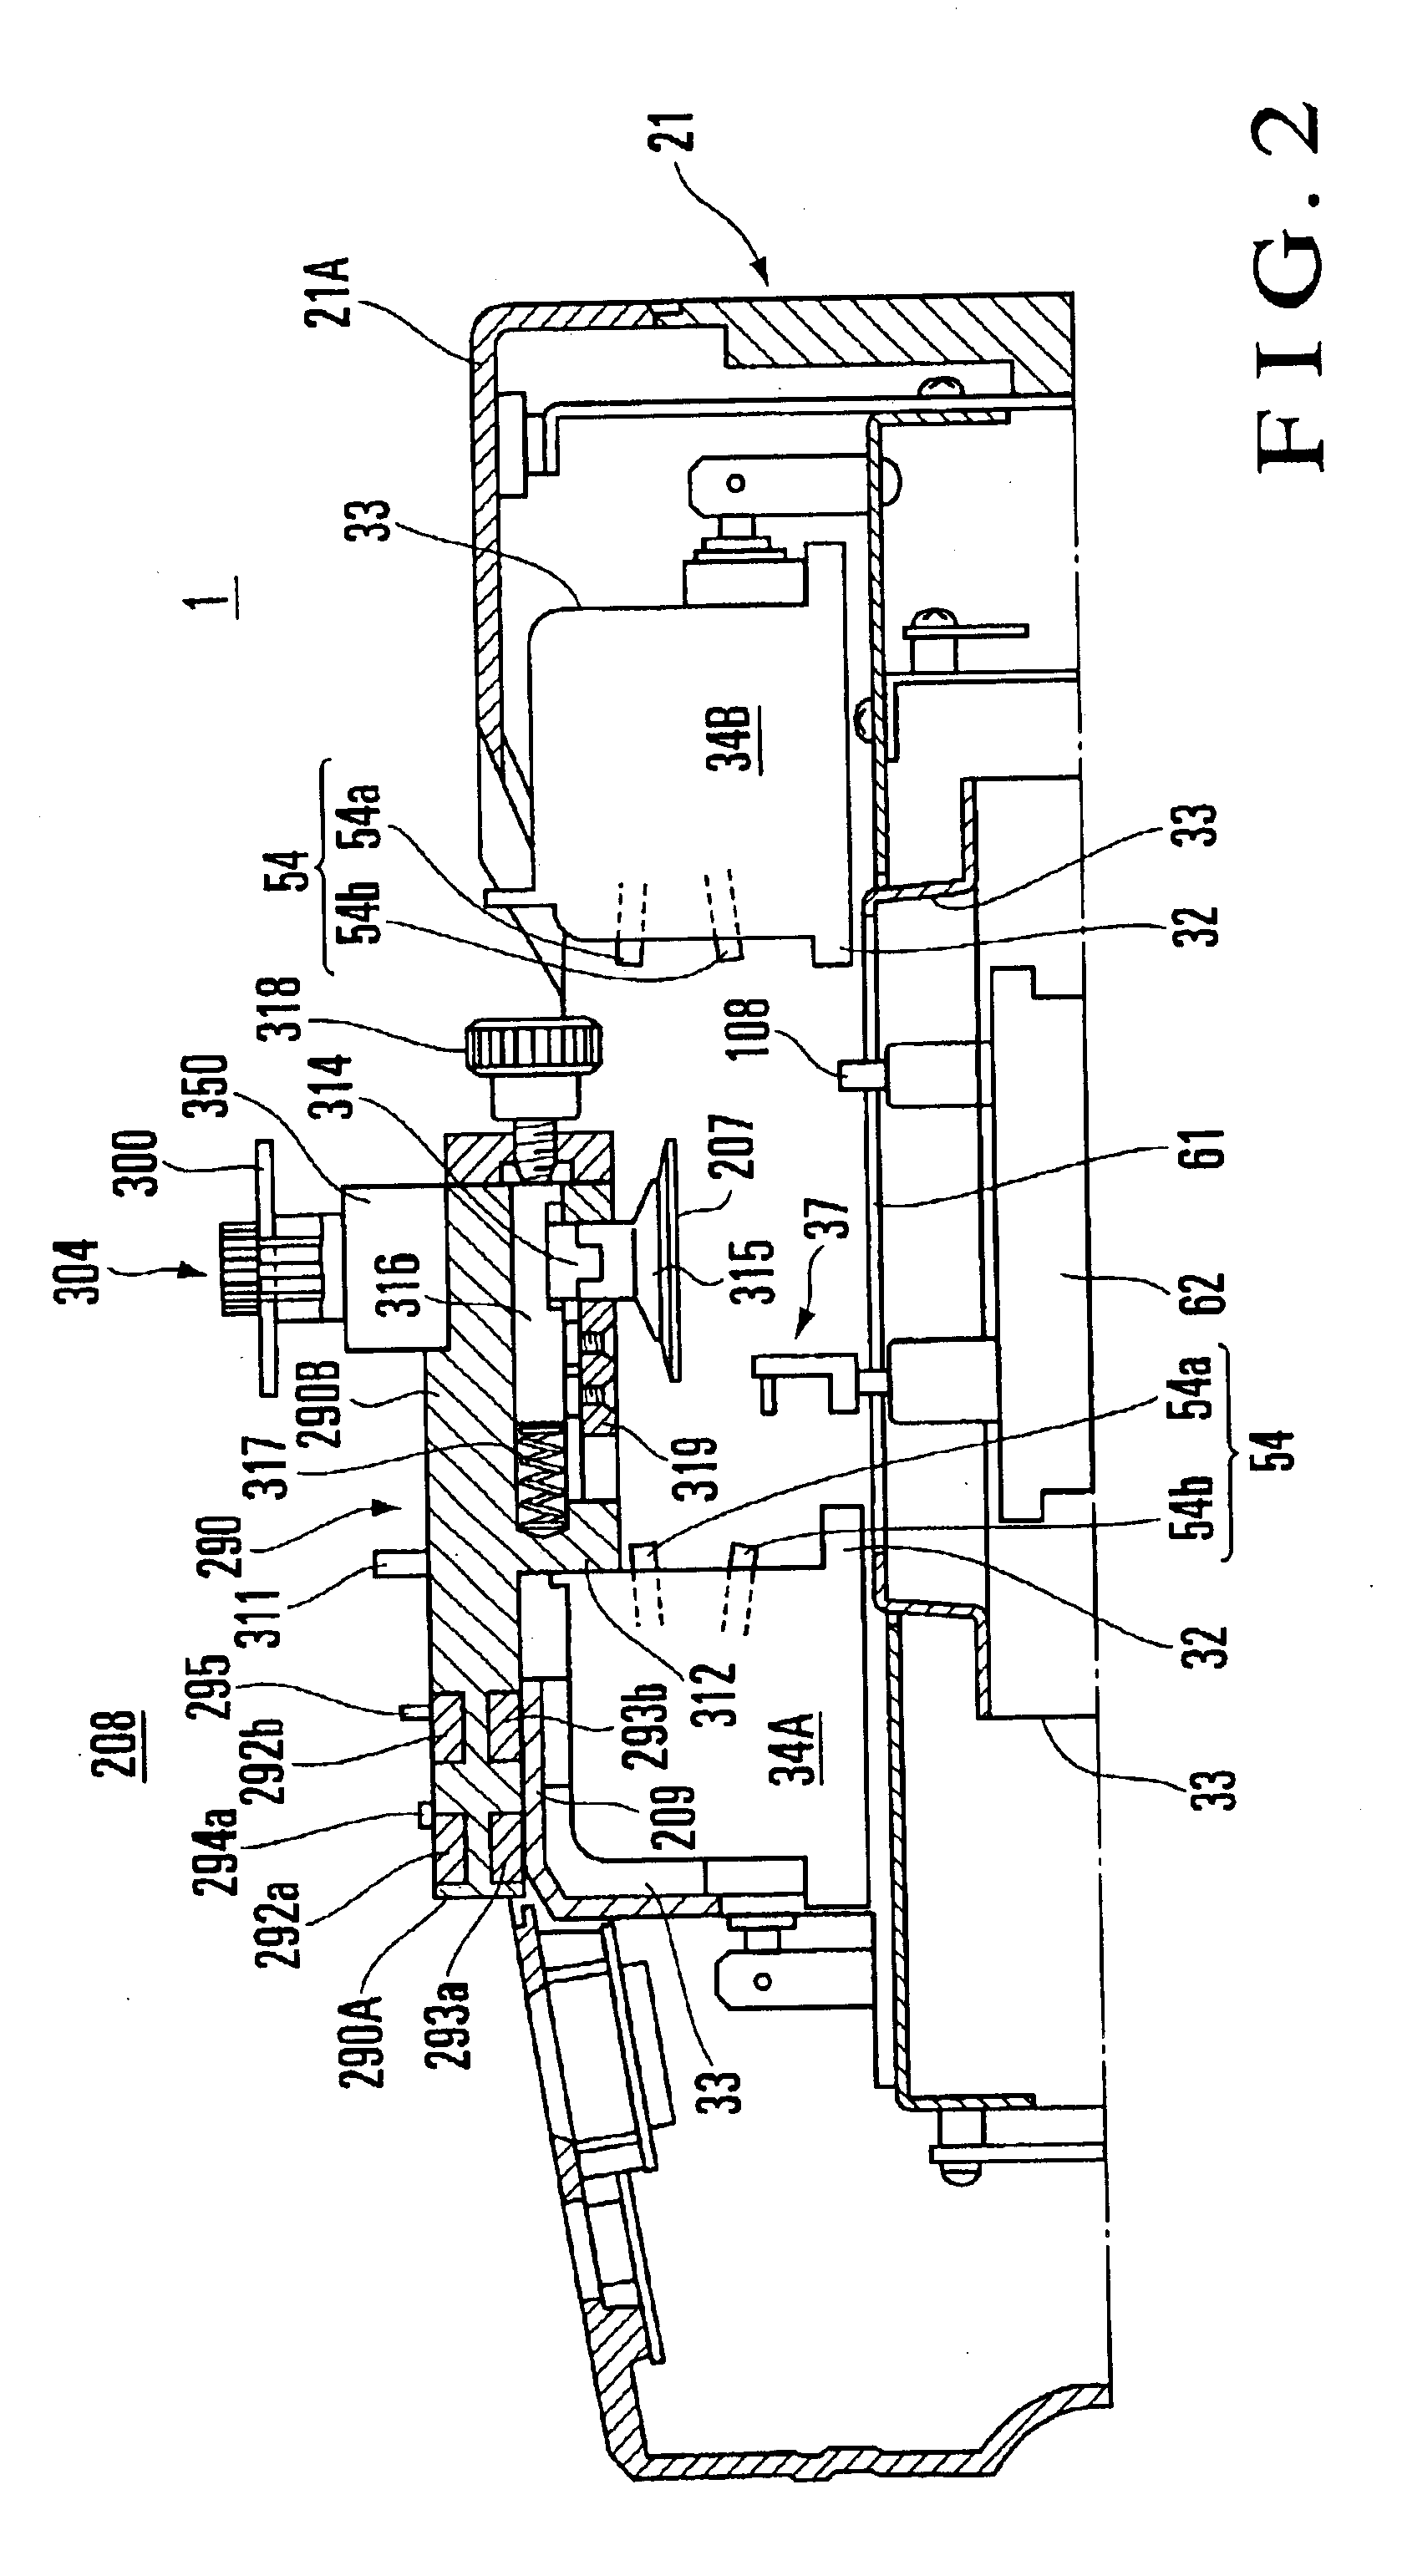 Spectacle frame shape measuring apparatus